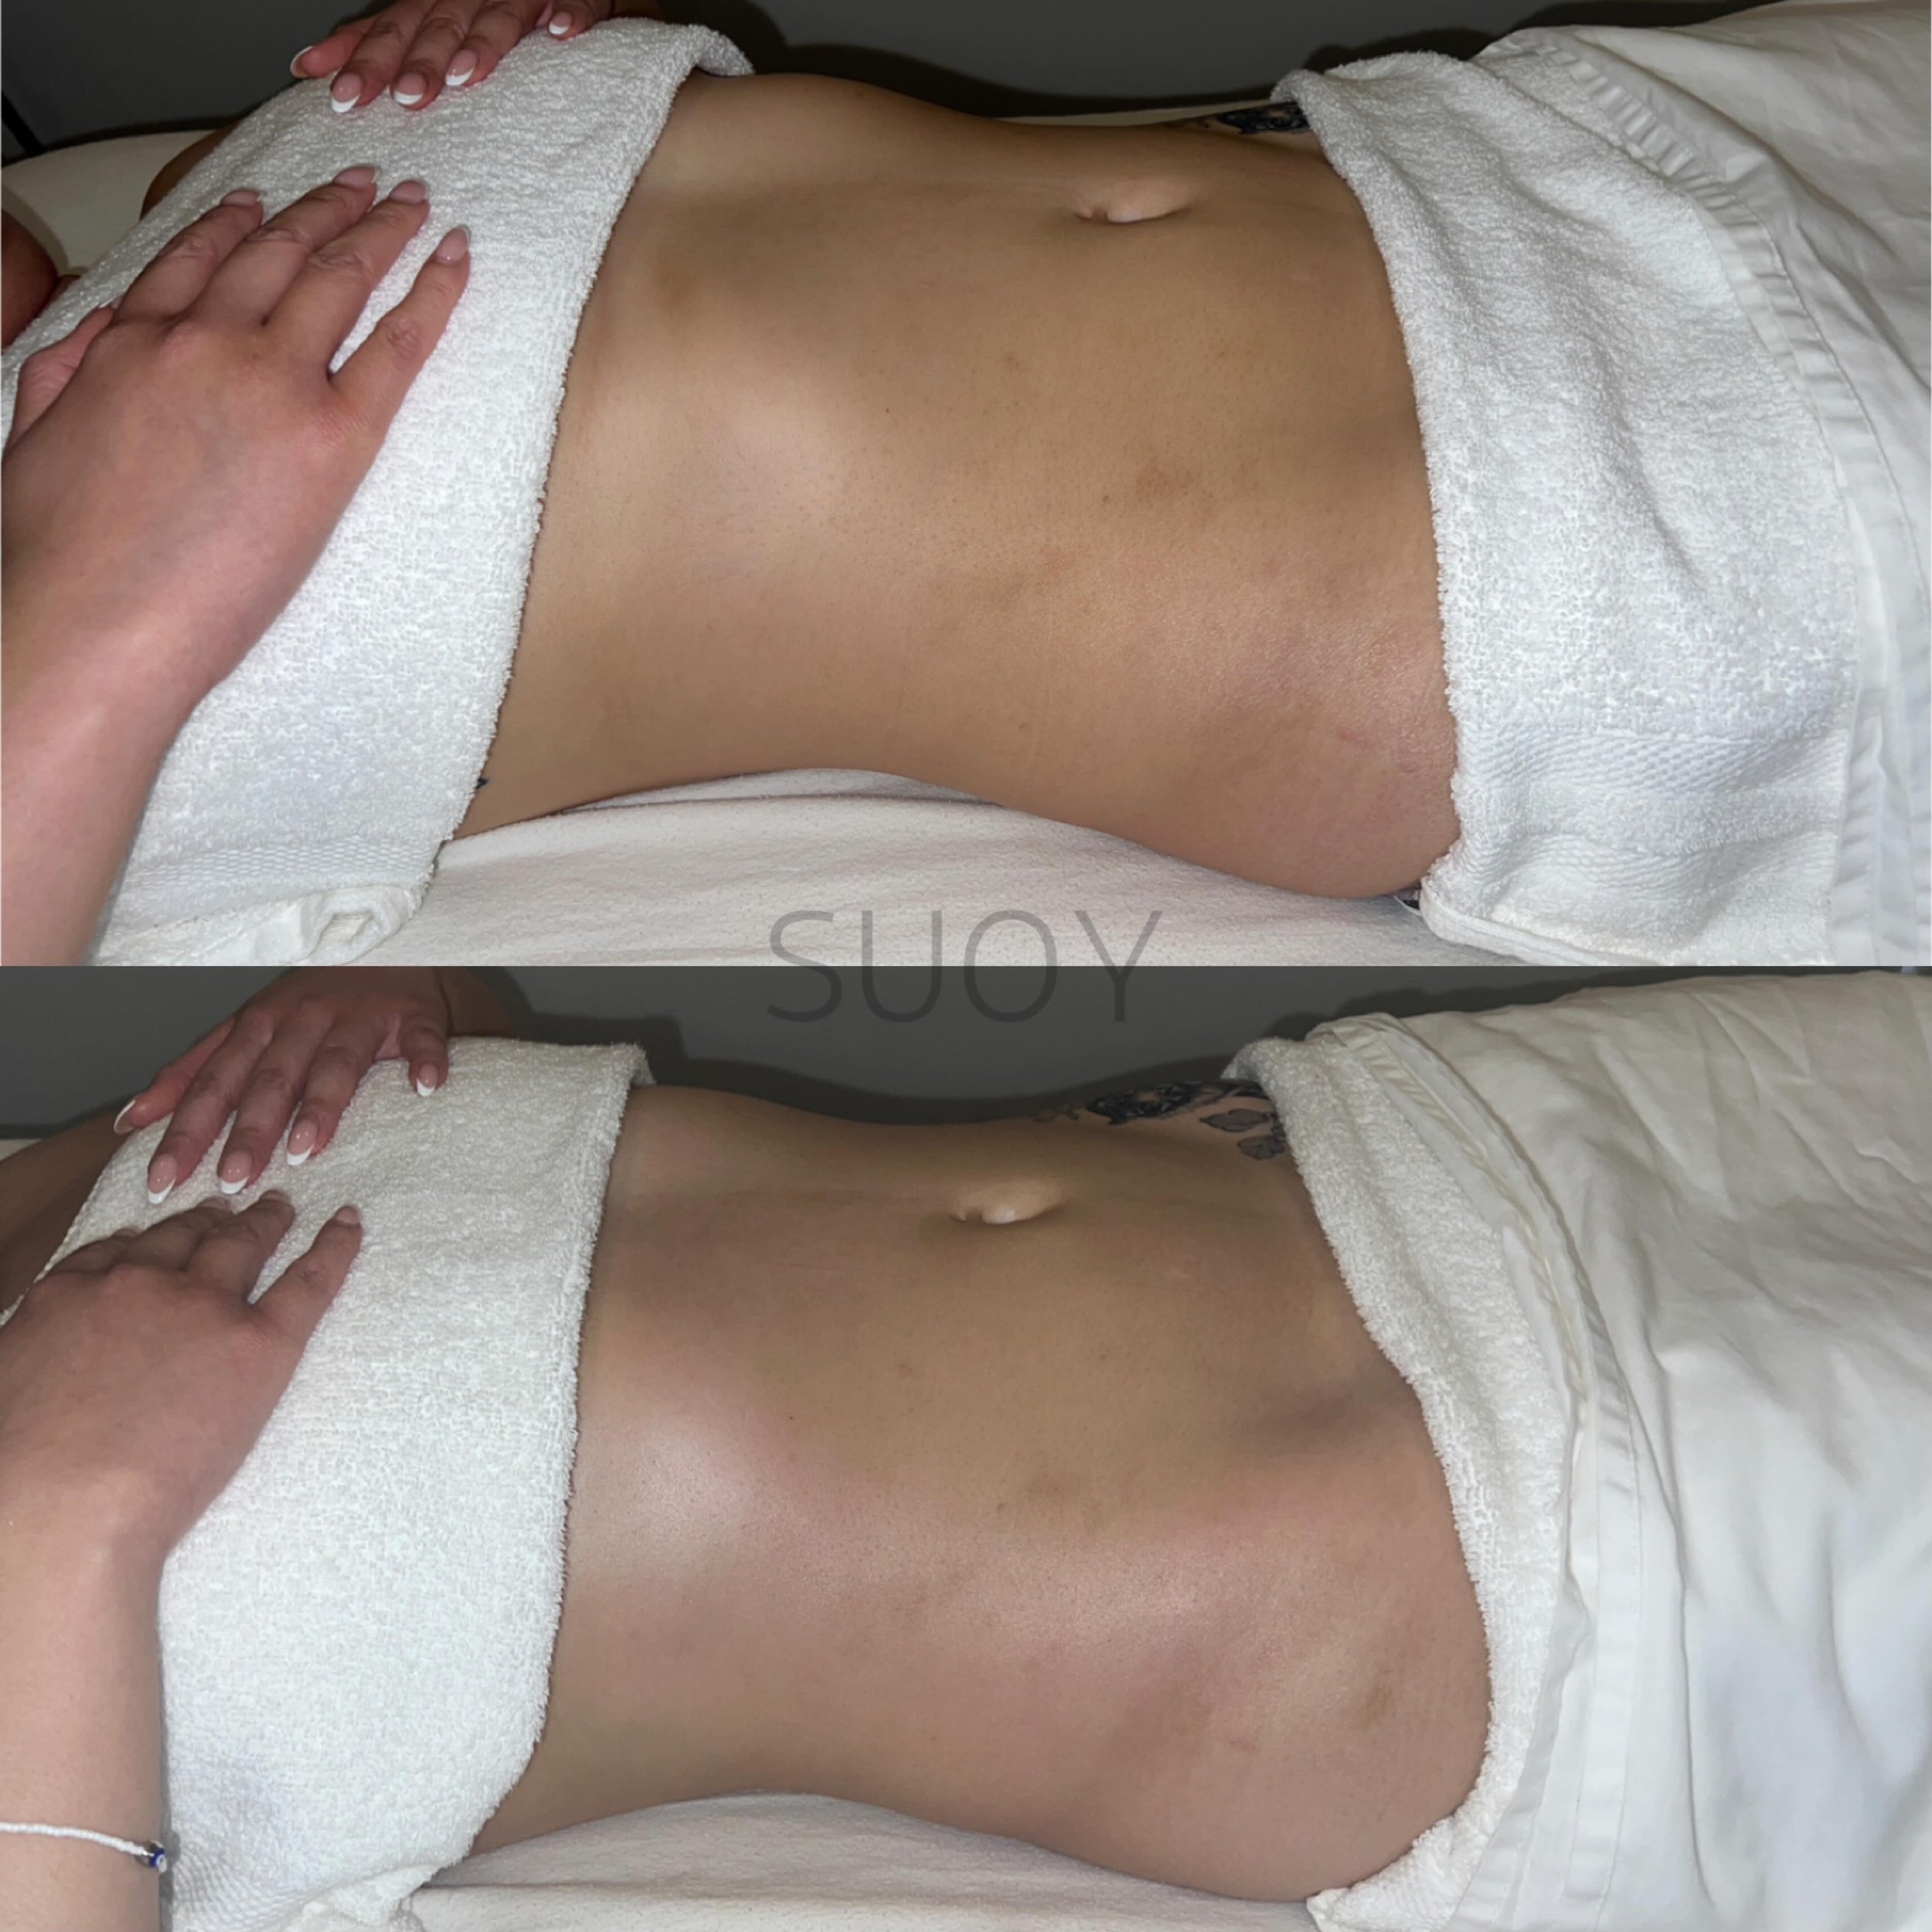 Brazilian Body Lymphatic Drainage Massage and Sculpting with techniques taught by Celebrity LMT Josie Rushing. 

Look what 50MINS can do! Top is before, bottom is after. 

We work on the WHOLE body! For us, this is more for health benefits than it is